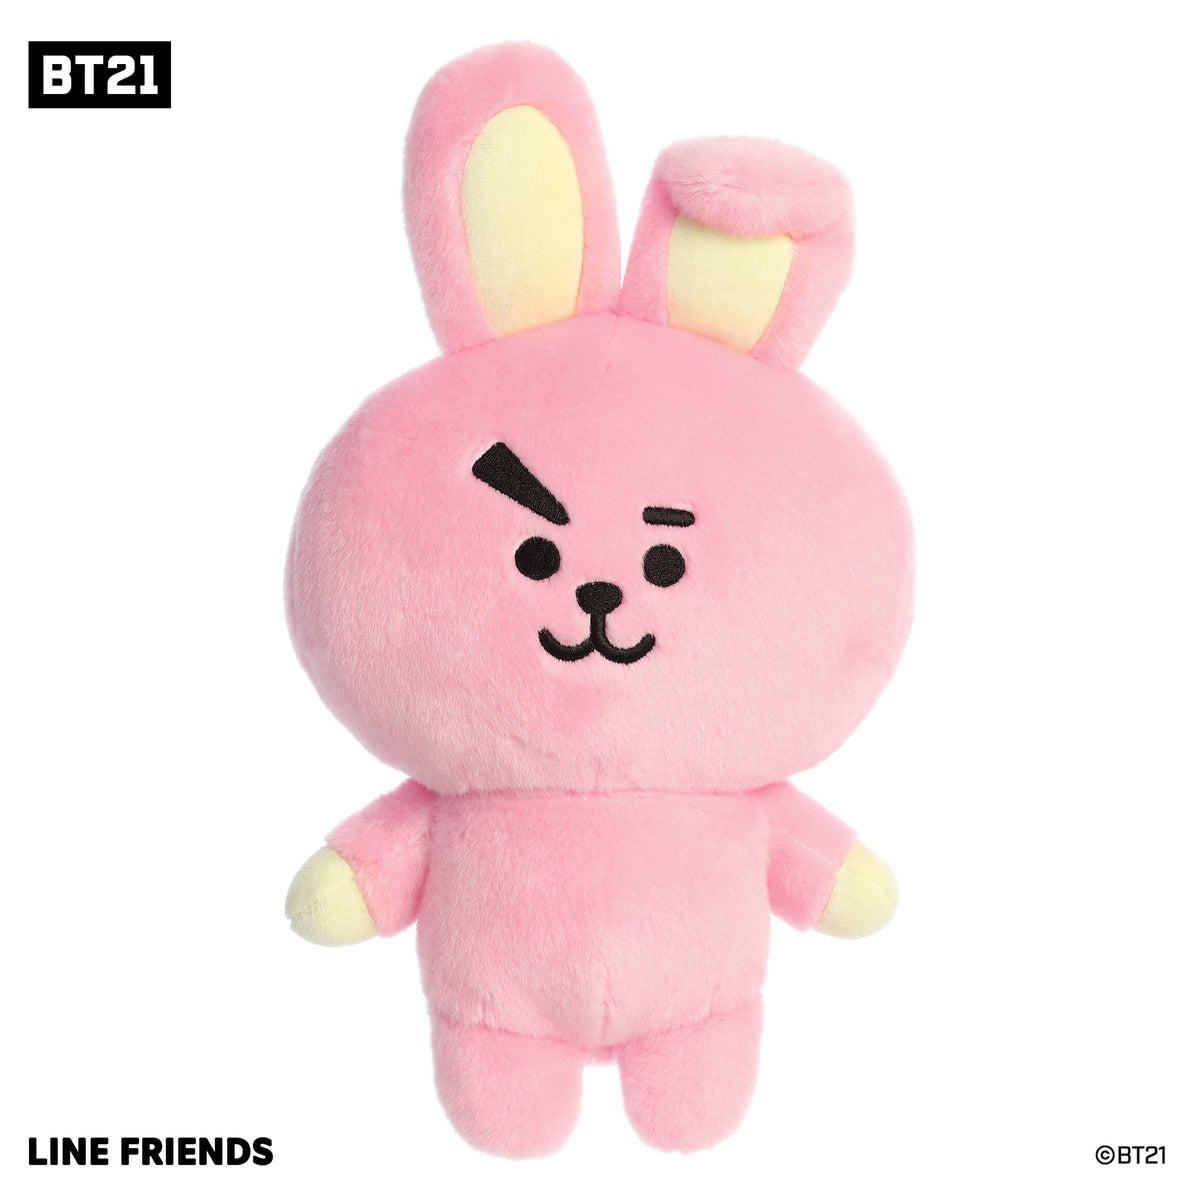 Bright pink COOKY Plush by BT21, with cream inner ear accents, showcasing a playful expression